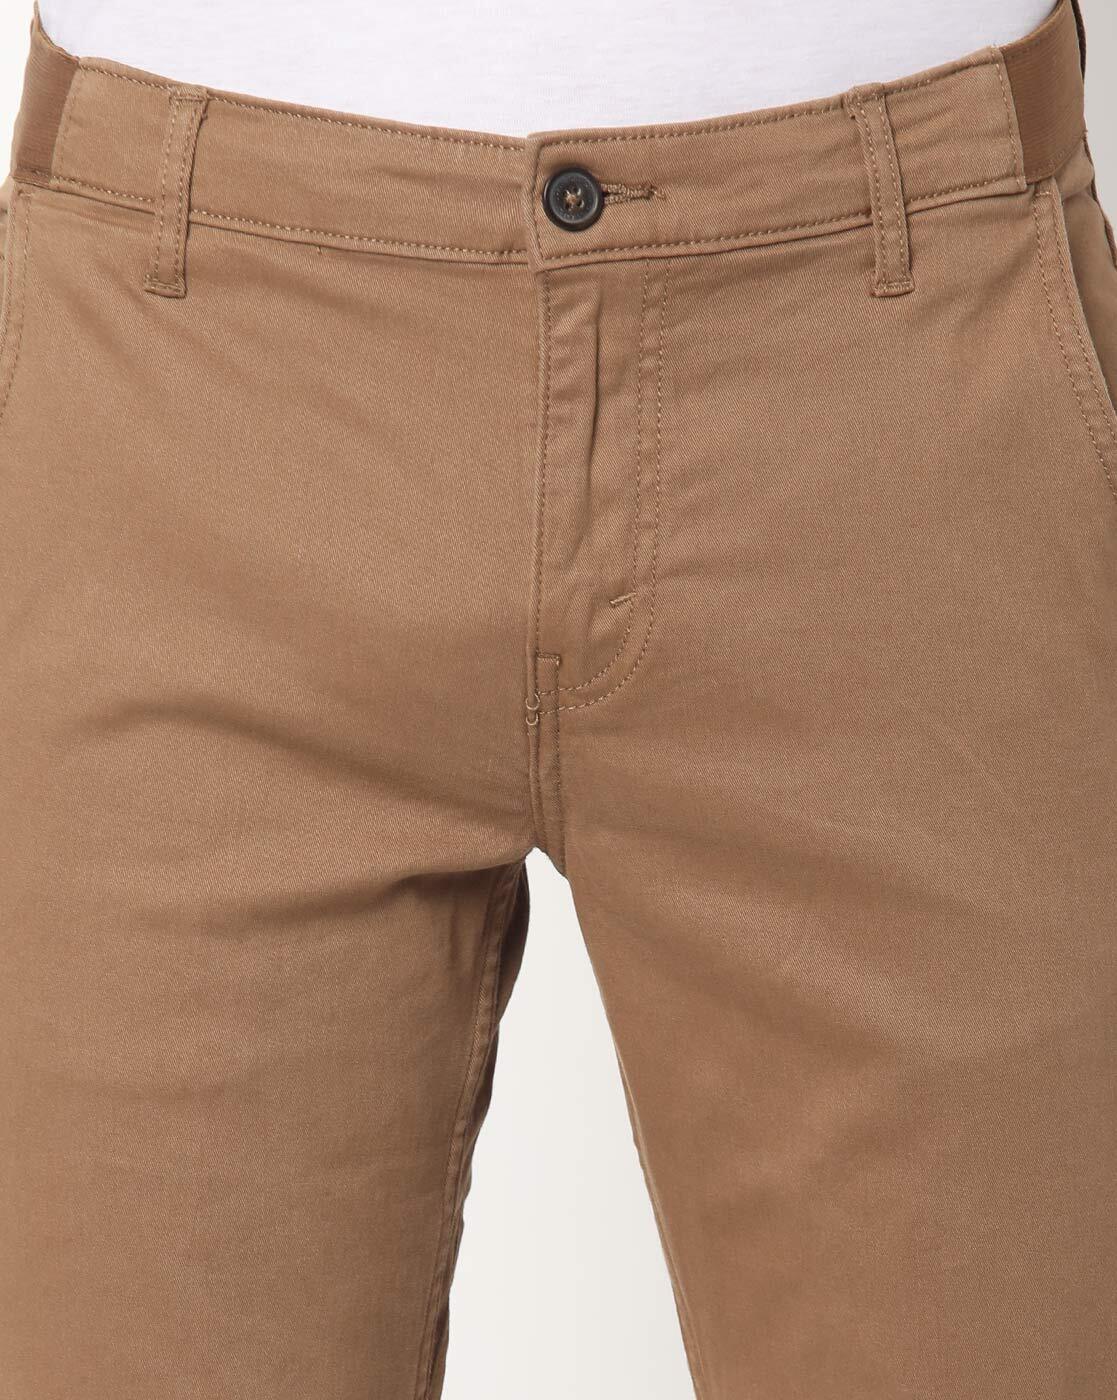 Buy Brown Trousers  Pants for Men by JOHN PLAYERS JEANS Online  Ajiocom